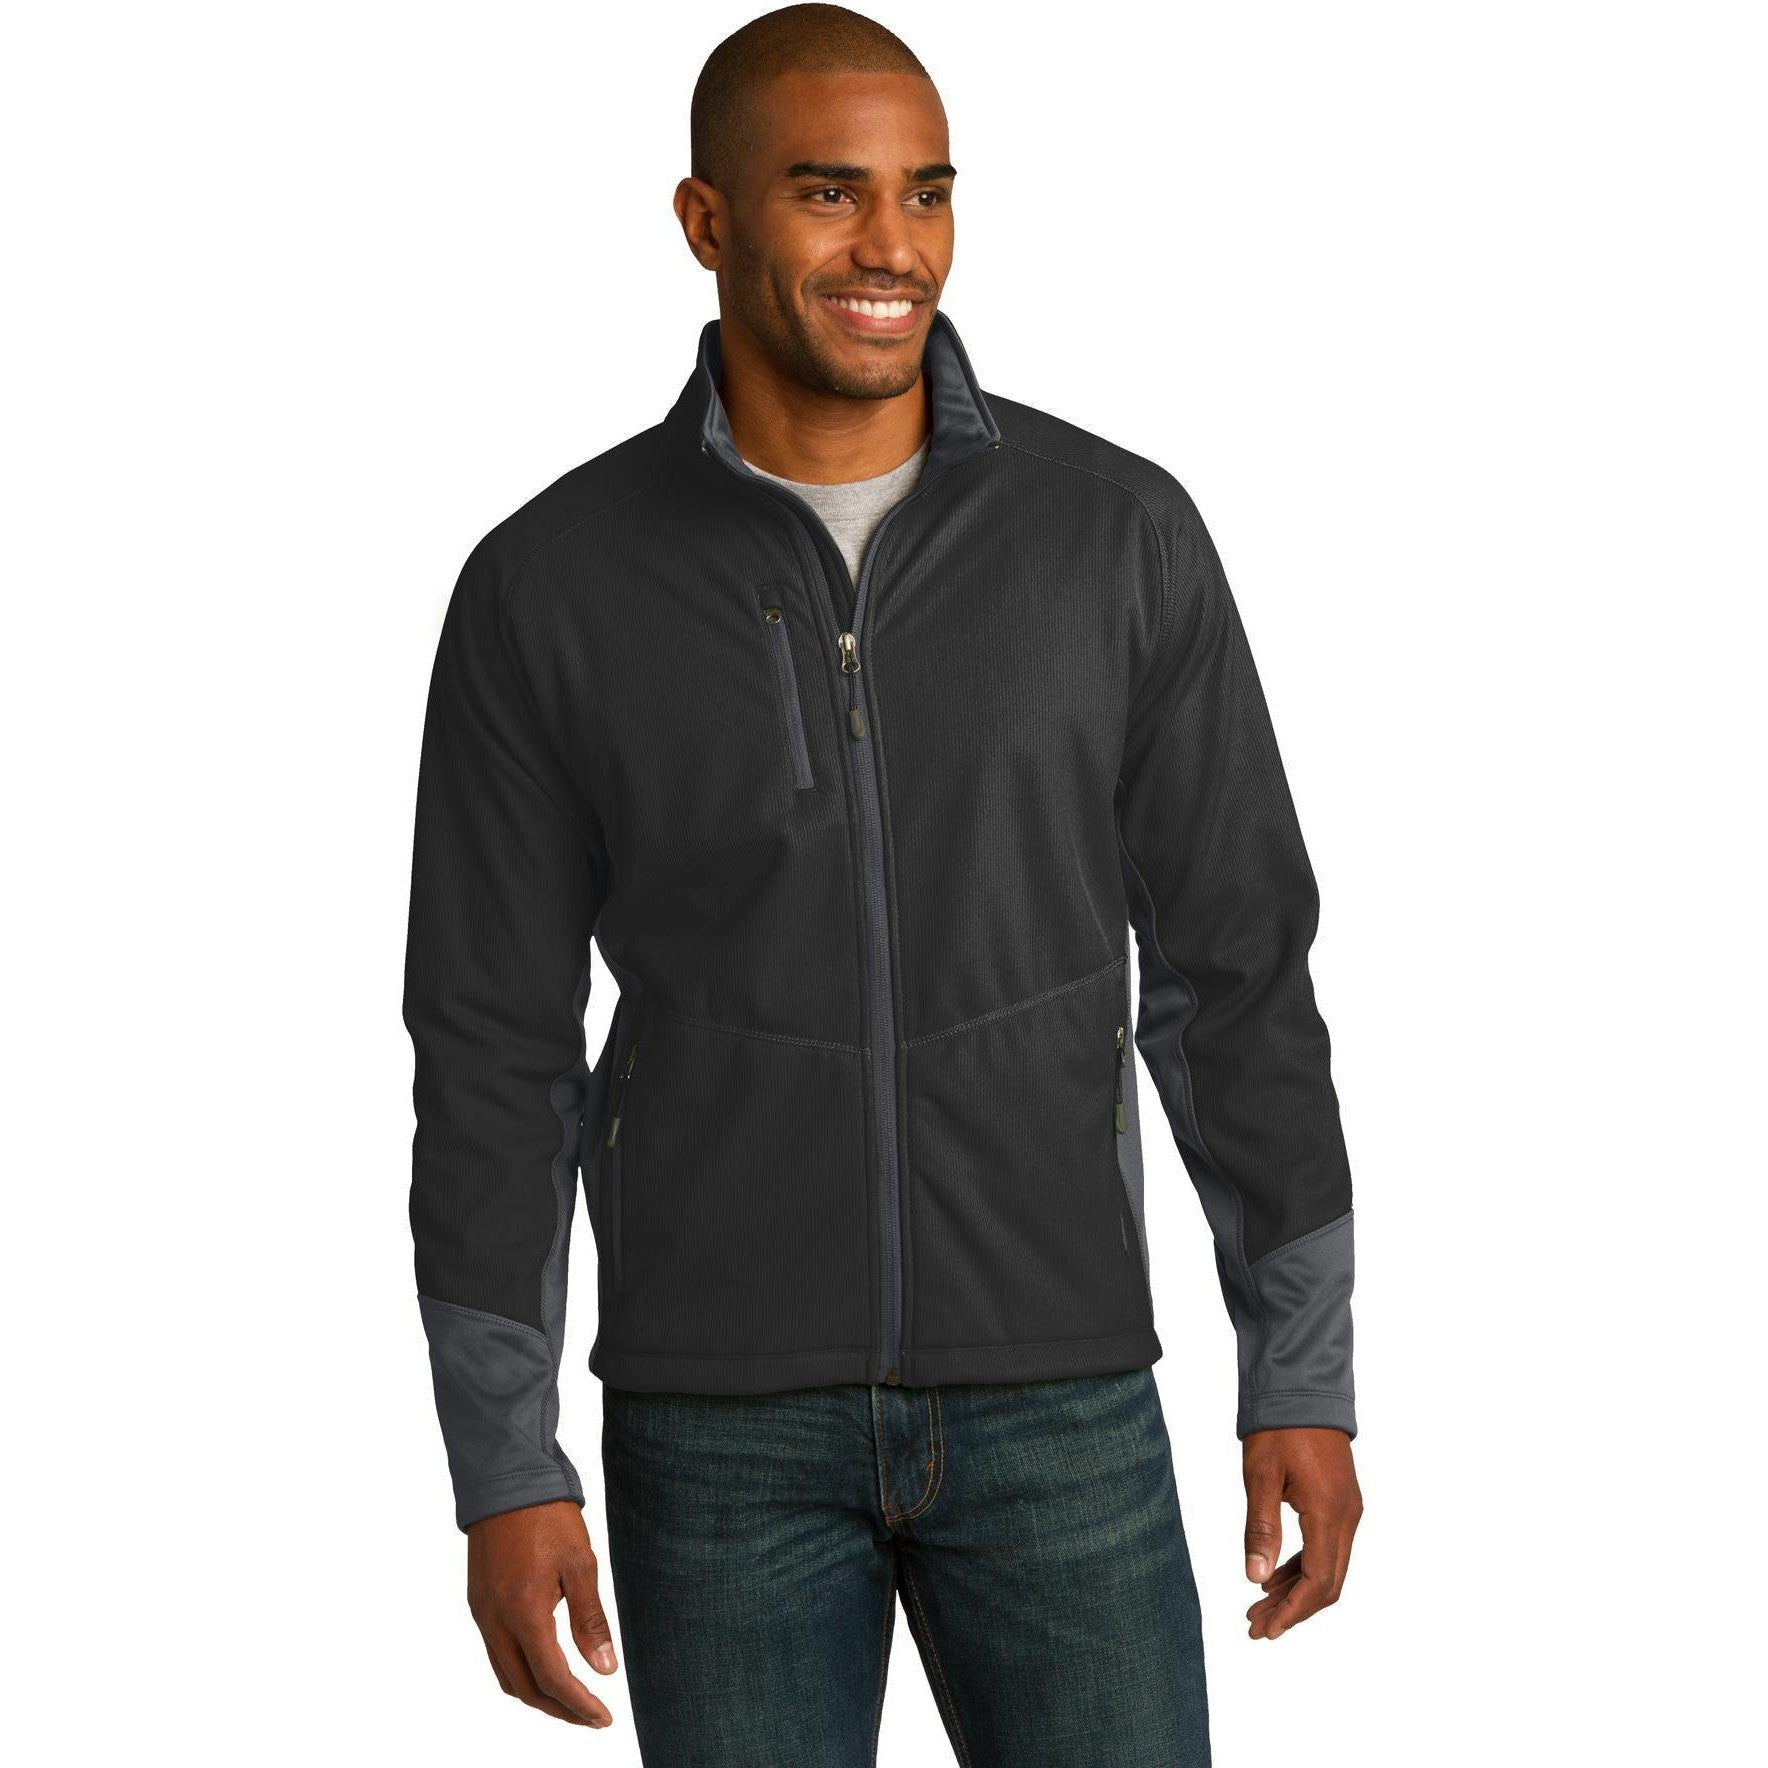 CLOSEOUT - Port Authority Vertical Soft Shell Jacket